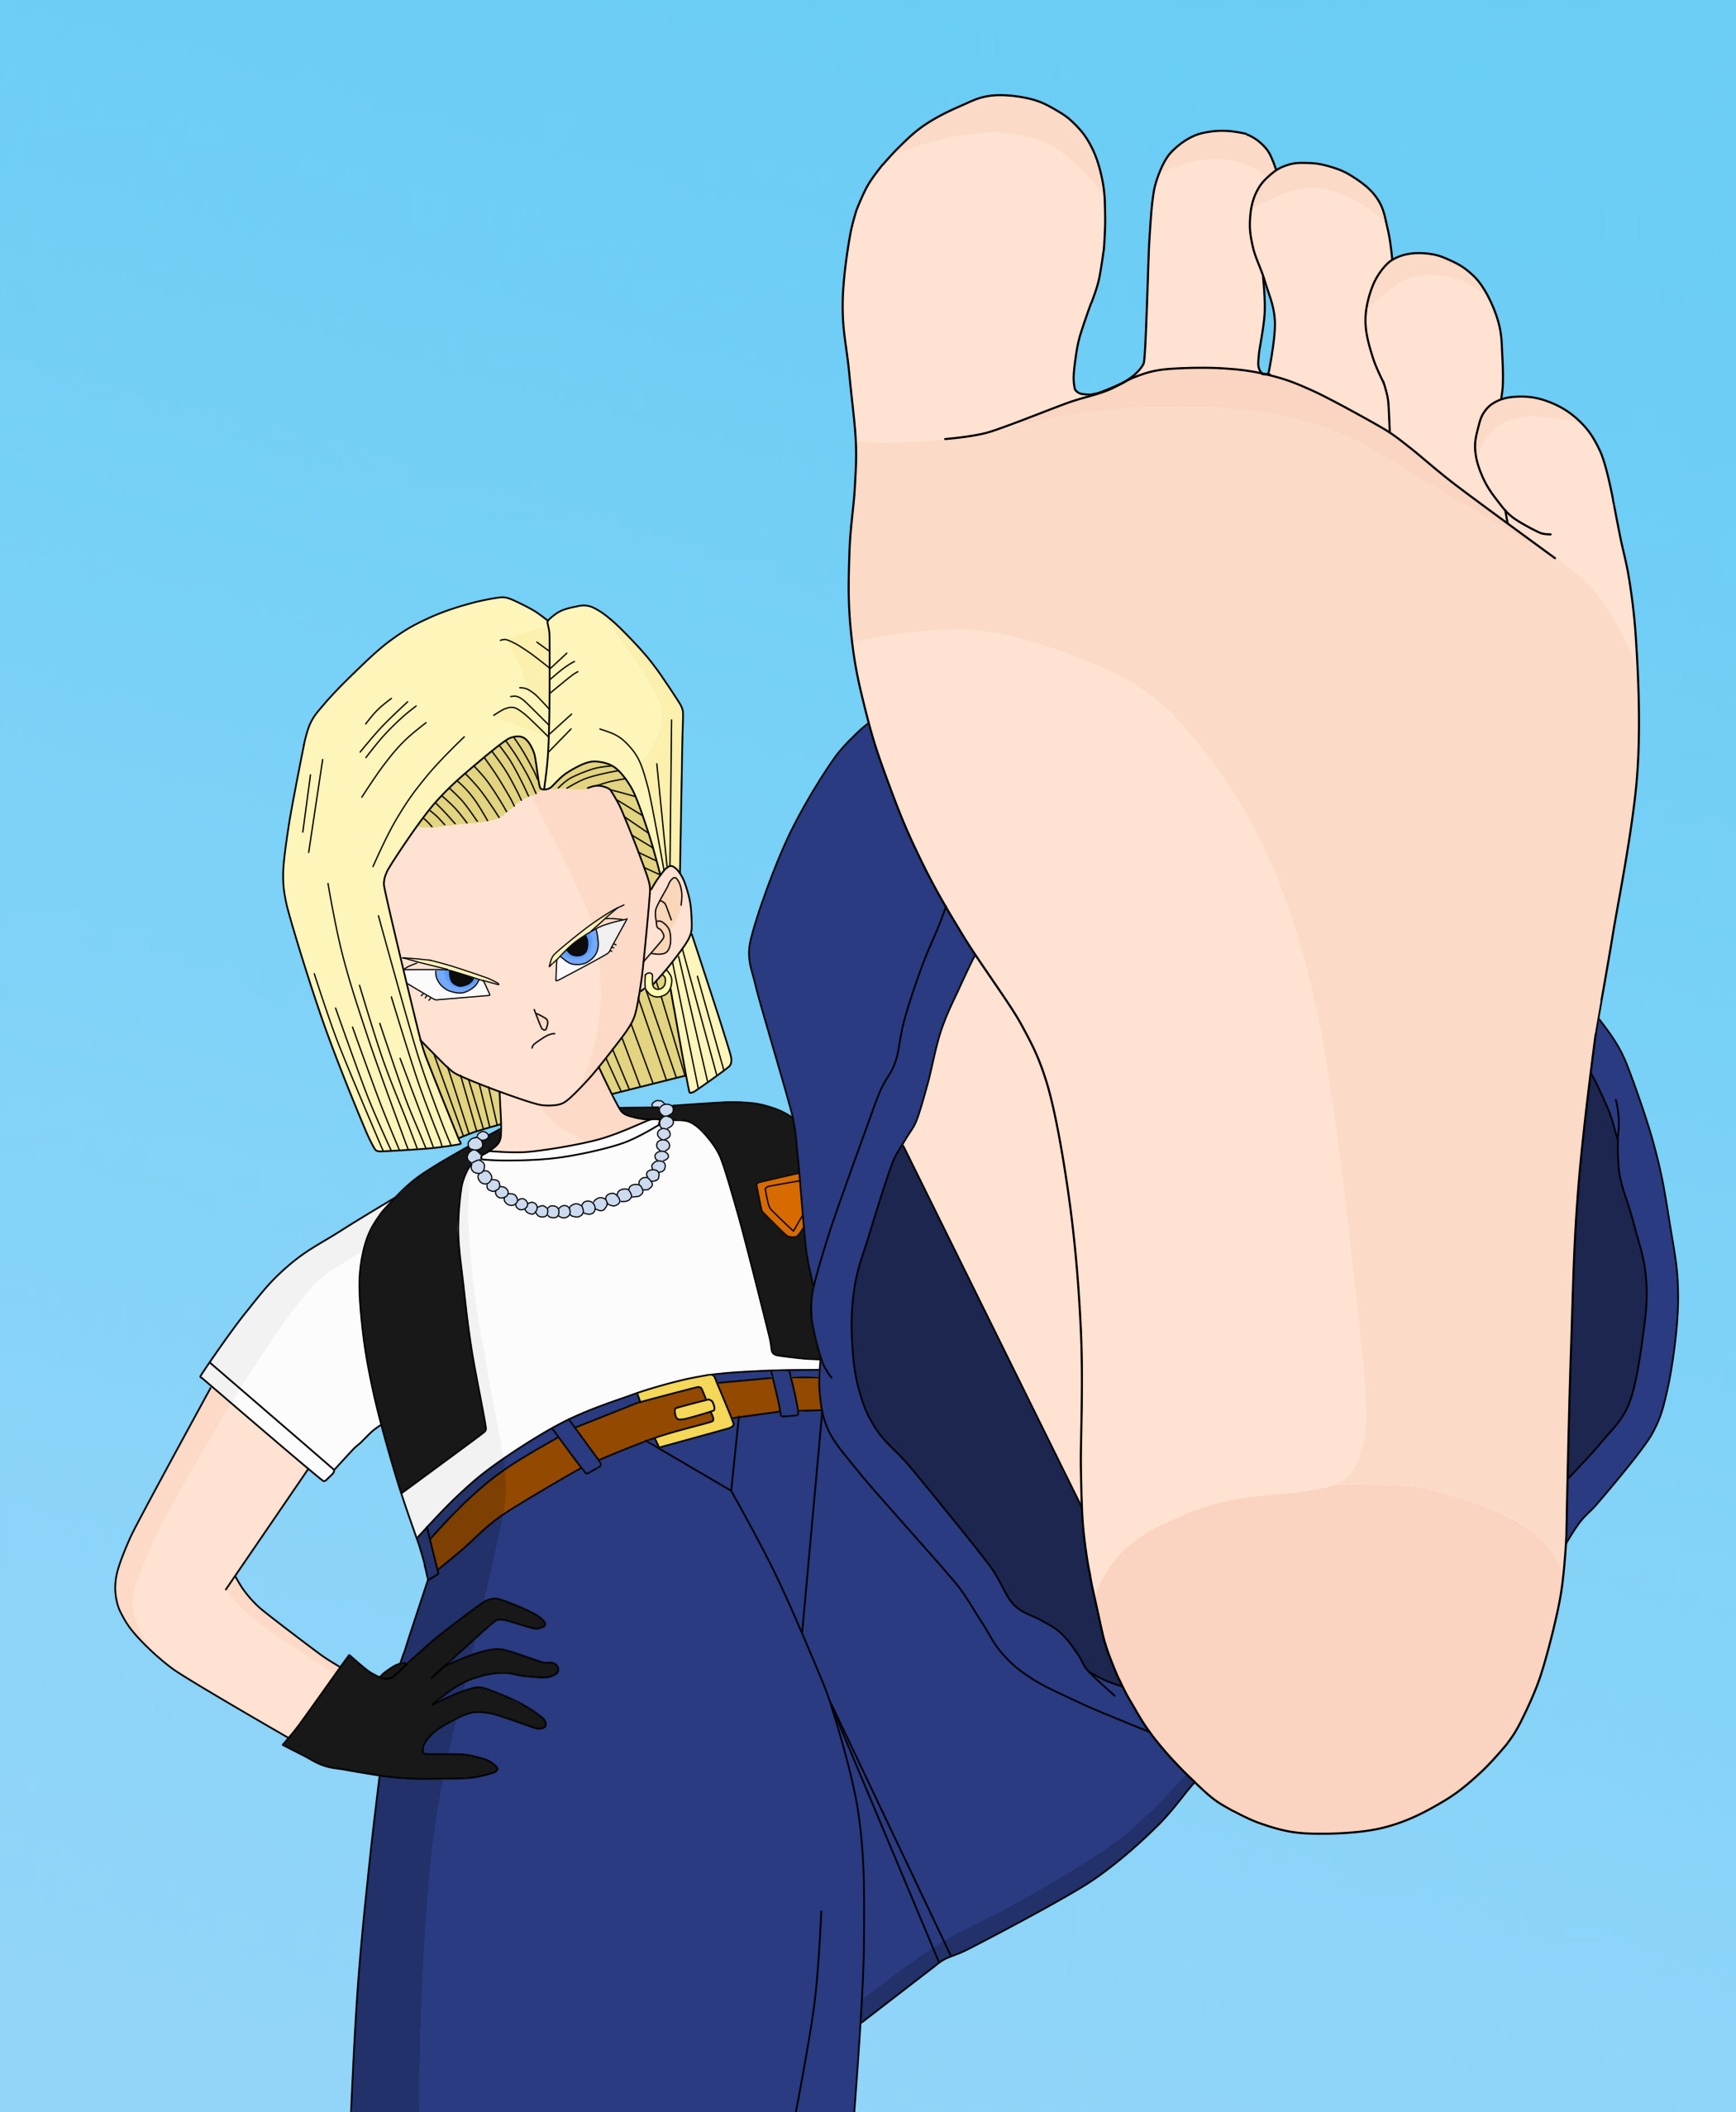 android_18_sole_pov_by_ihaccer_d6axf90.jpg.